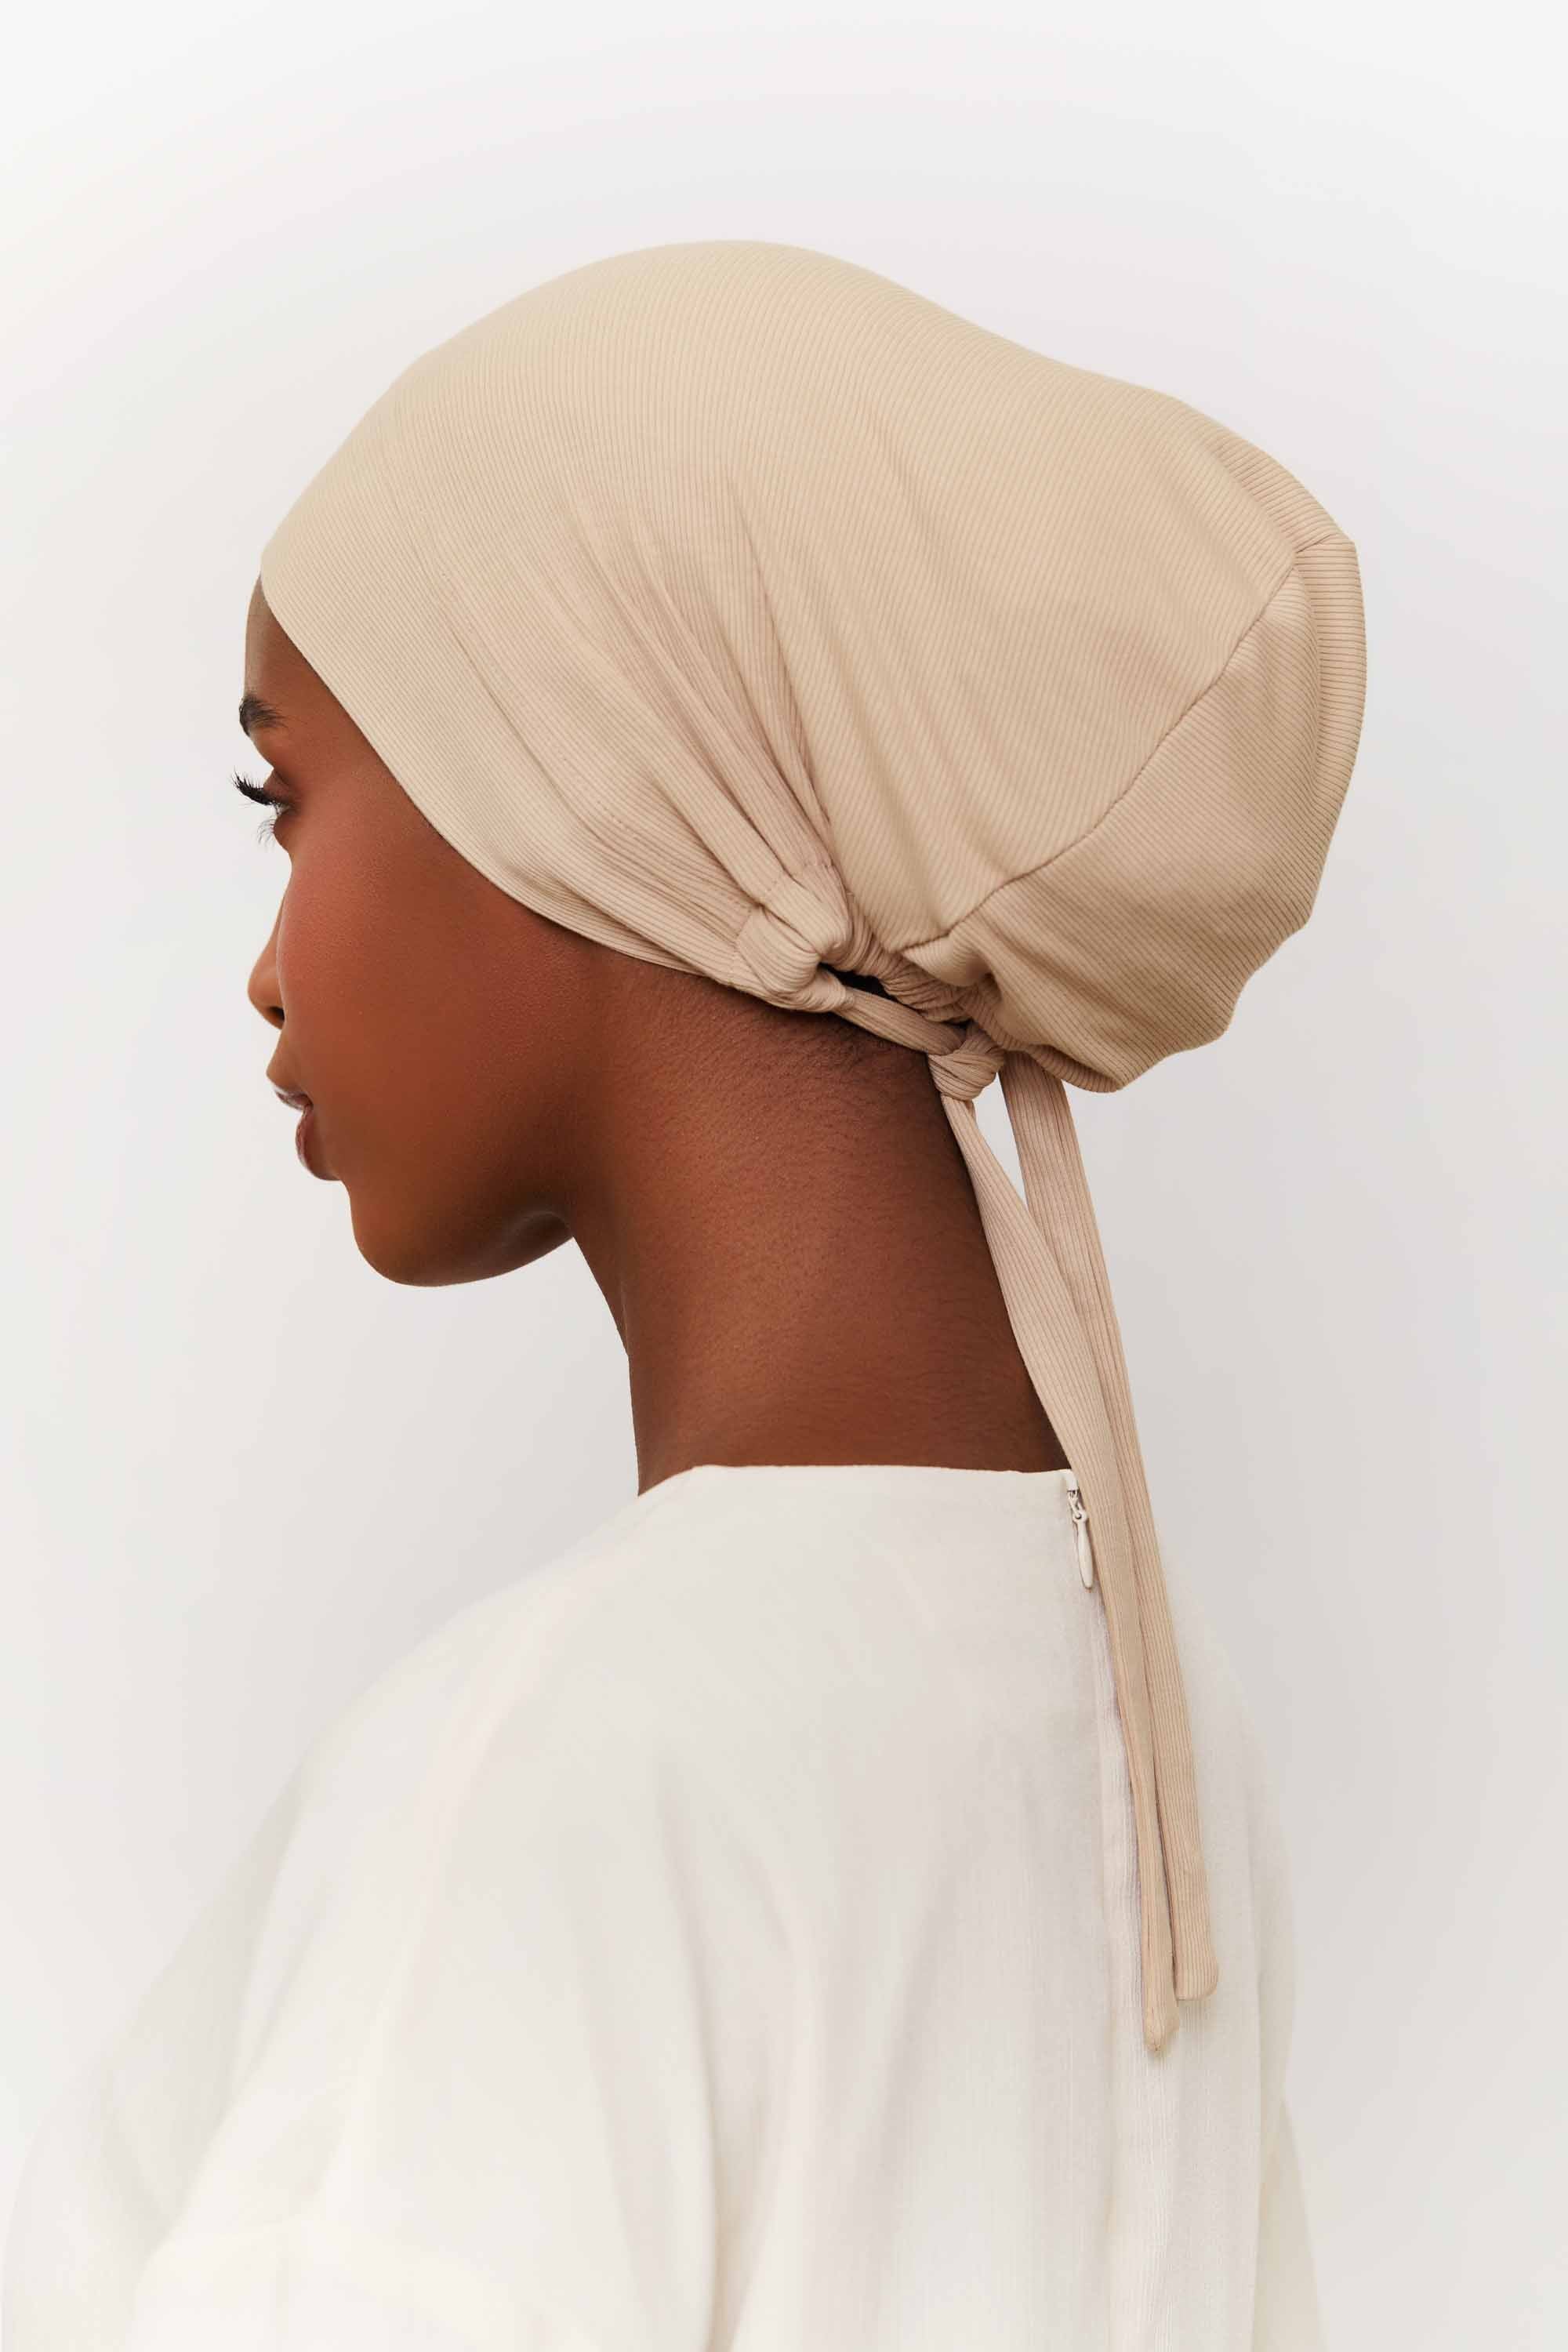 Ribbed Tie Back Undercap - Light Taupe Extra Small Accessories Veiled 